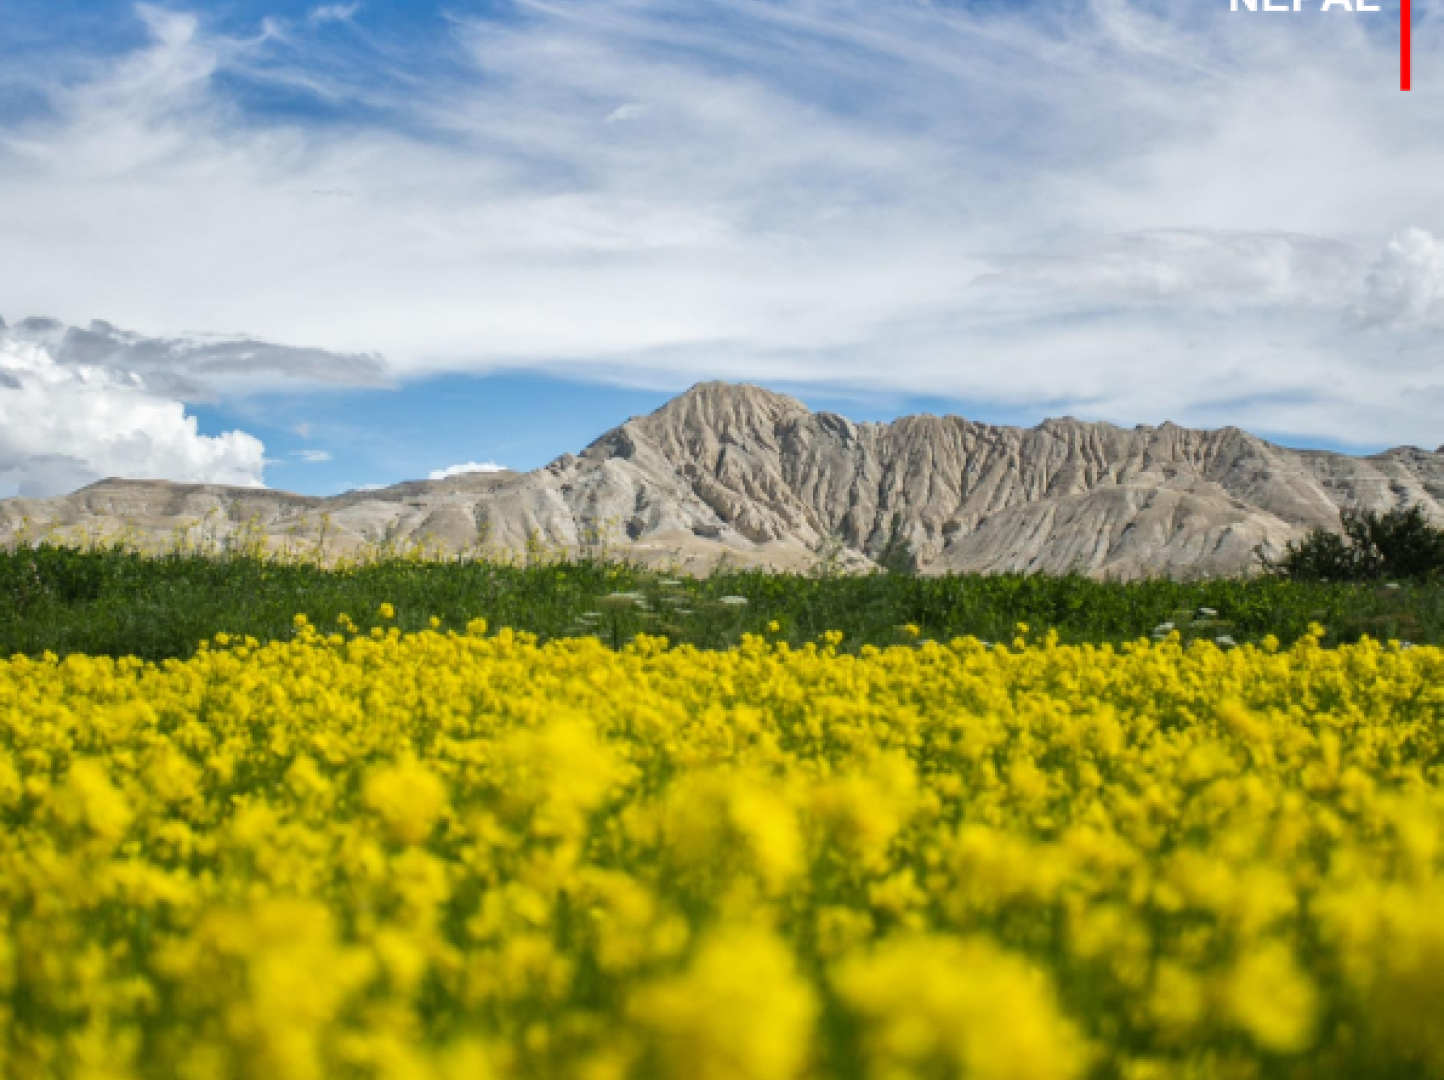 A field of yellow flowers with a gray mountain cutting across the middle of the image and a blue sky with white clouds above the mountain. The UN logo and an SDG logo reading "Decade of Action" appears in the top left corner. In the top right corner the title reads  "2021 UN Country Annual Results Nepal". In the bottom right corner it says "March 2022".